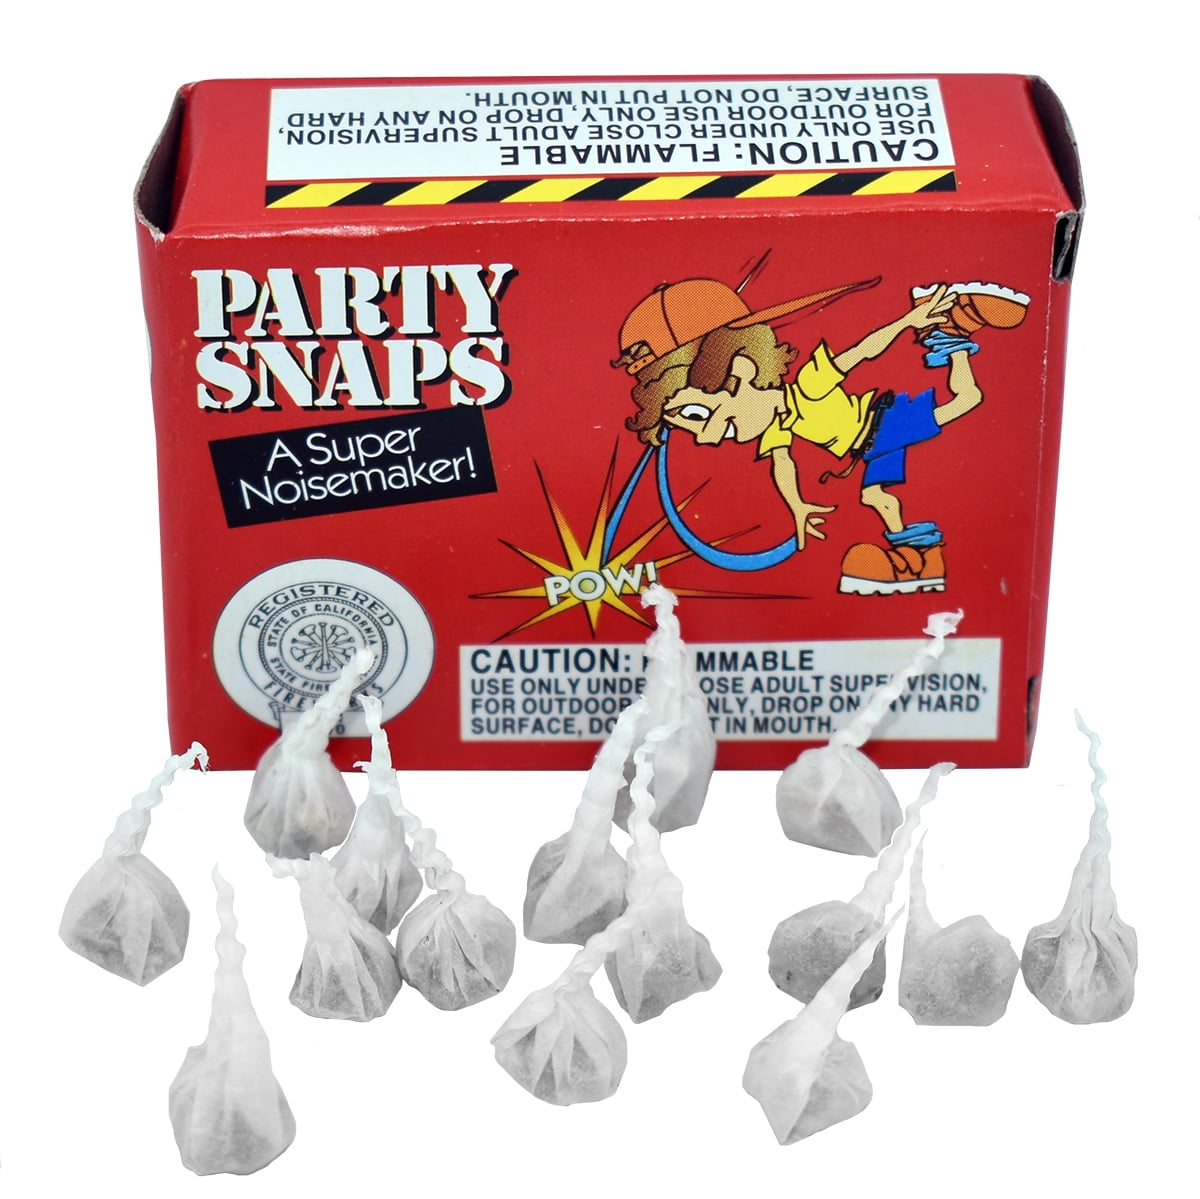 250 Bang Party Snap Pop Snapper Throwing Poppers Trick Noise Maker - Walmart.com